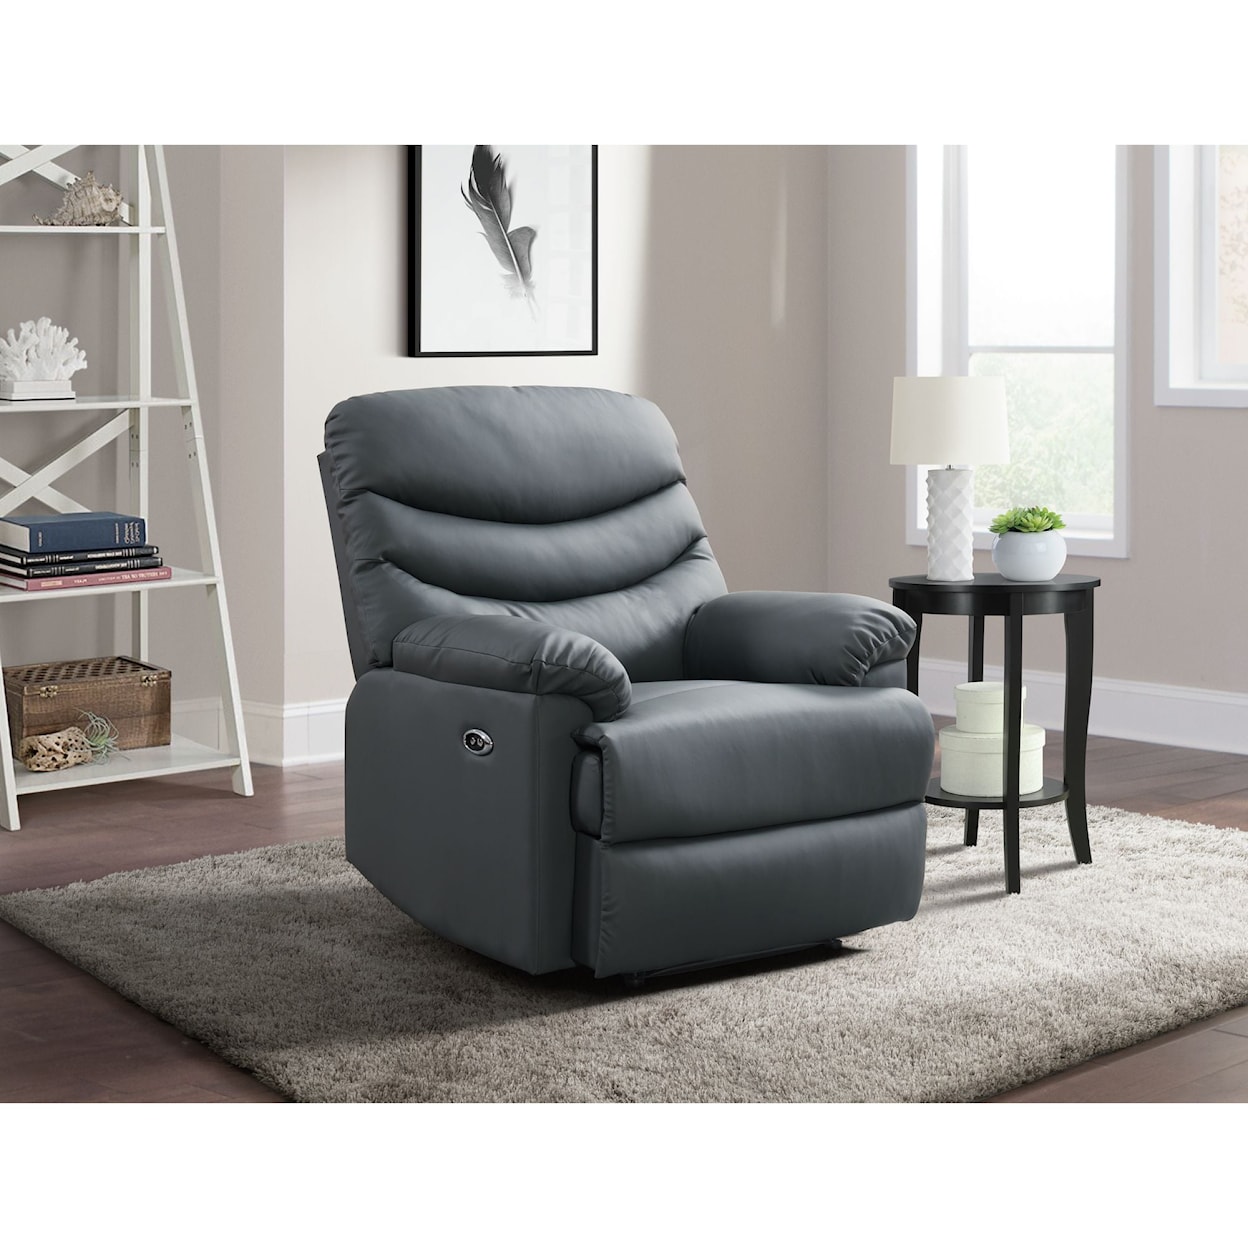 Elements Palmdale Power Motion Recliner with Pillow Arms